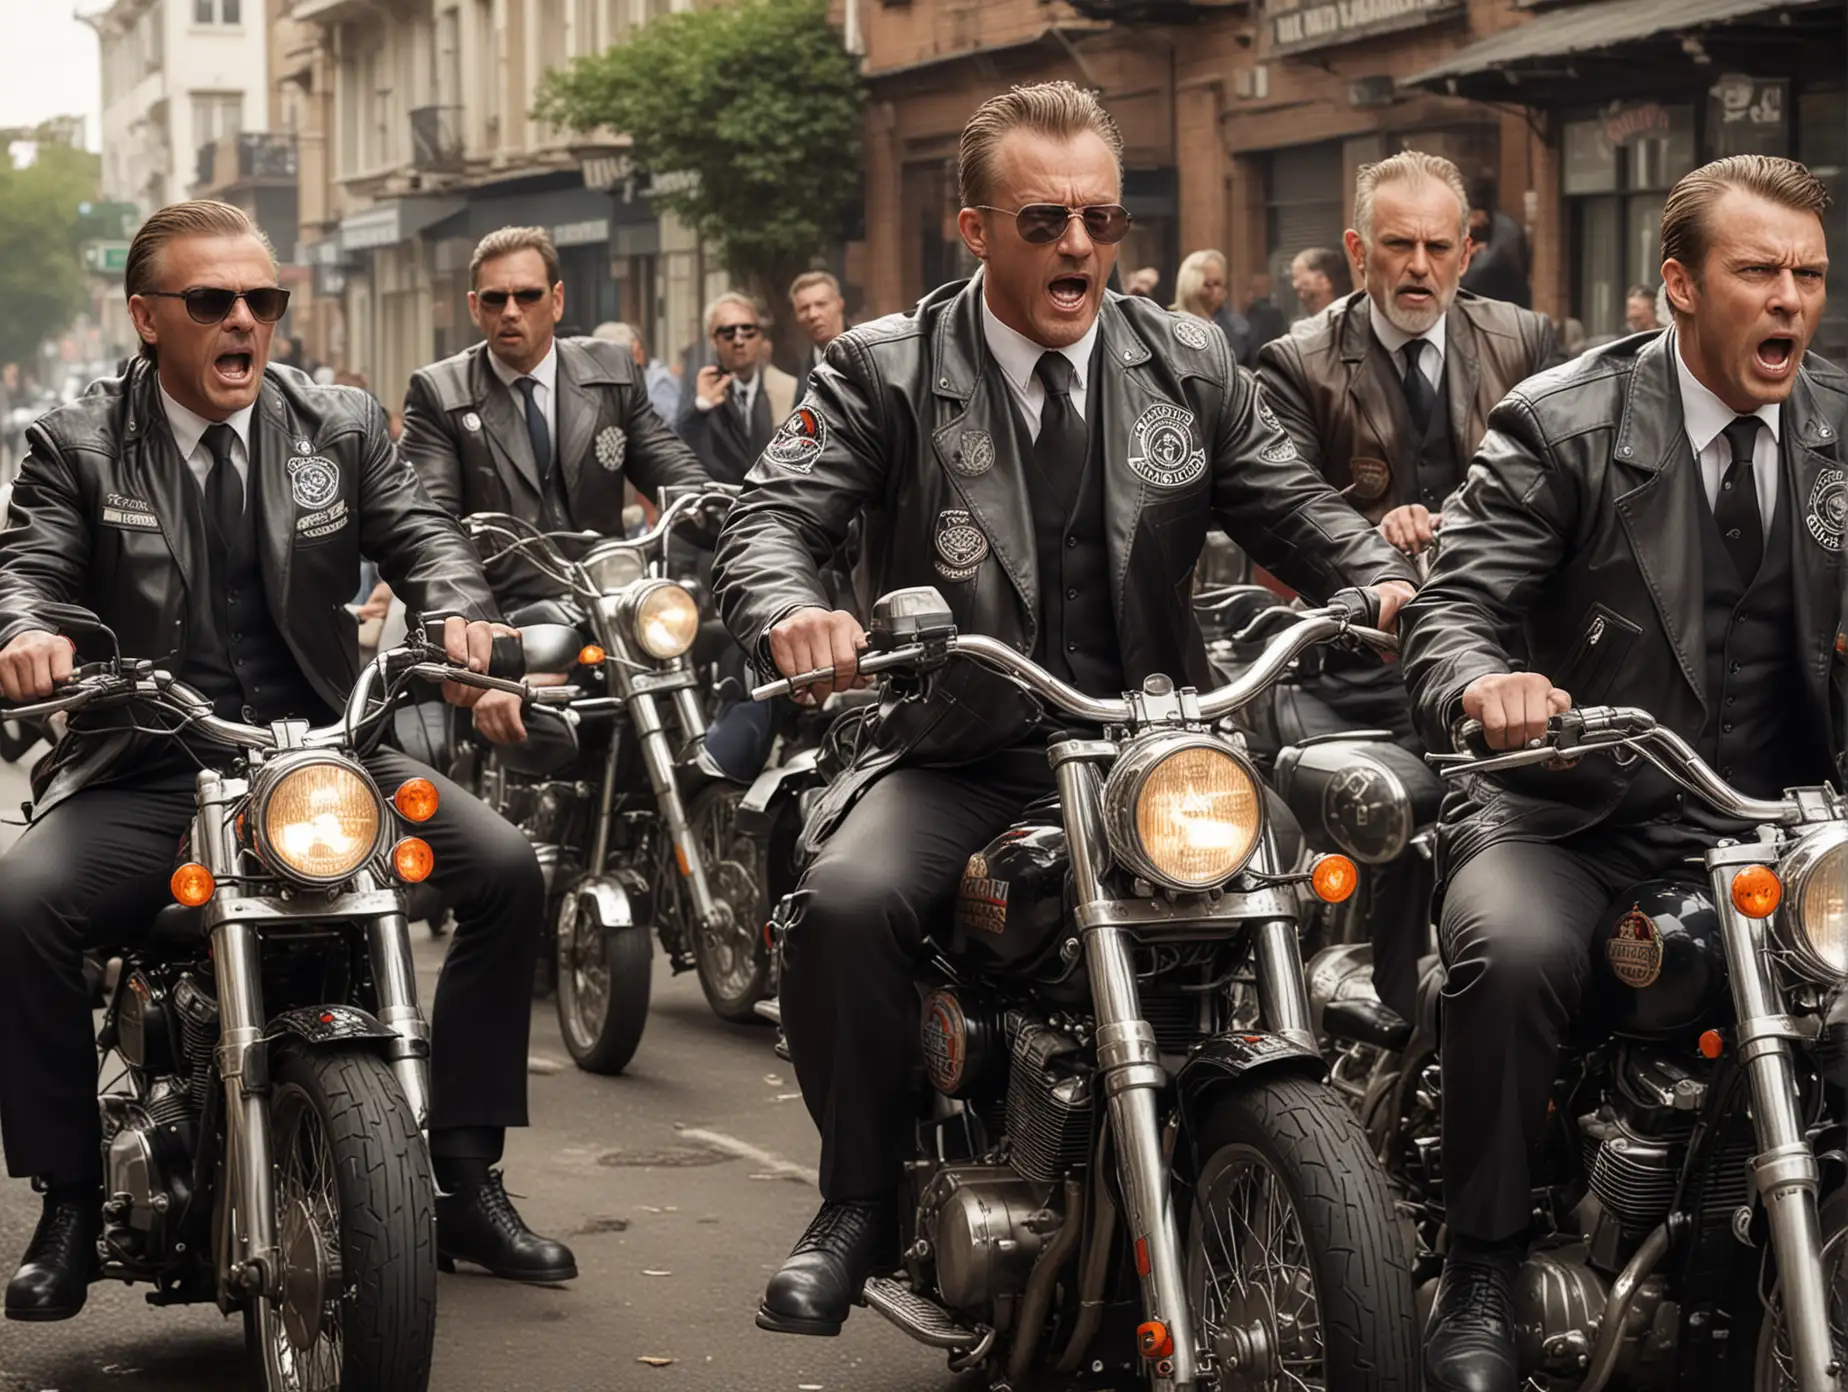 Angry Middleaged Male Lawyers Riding Motorcycles